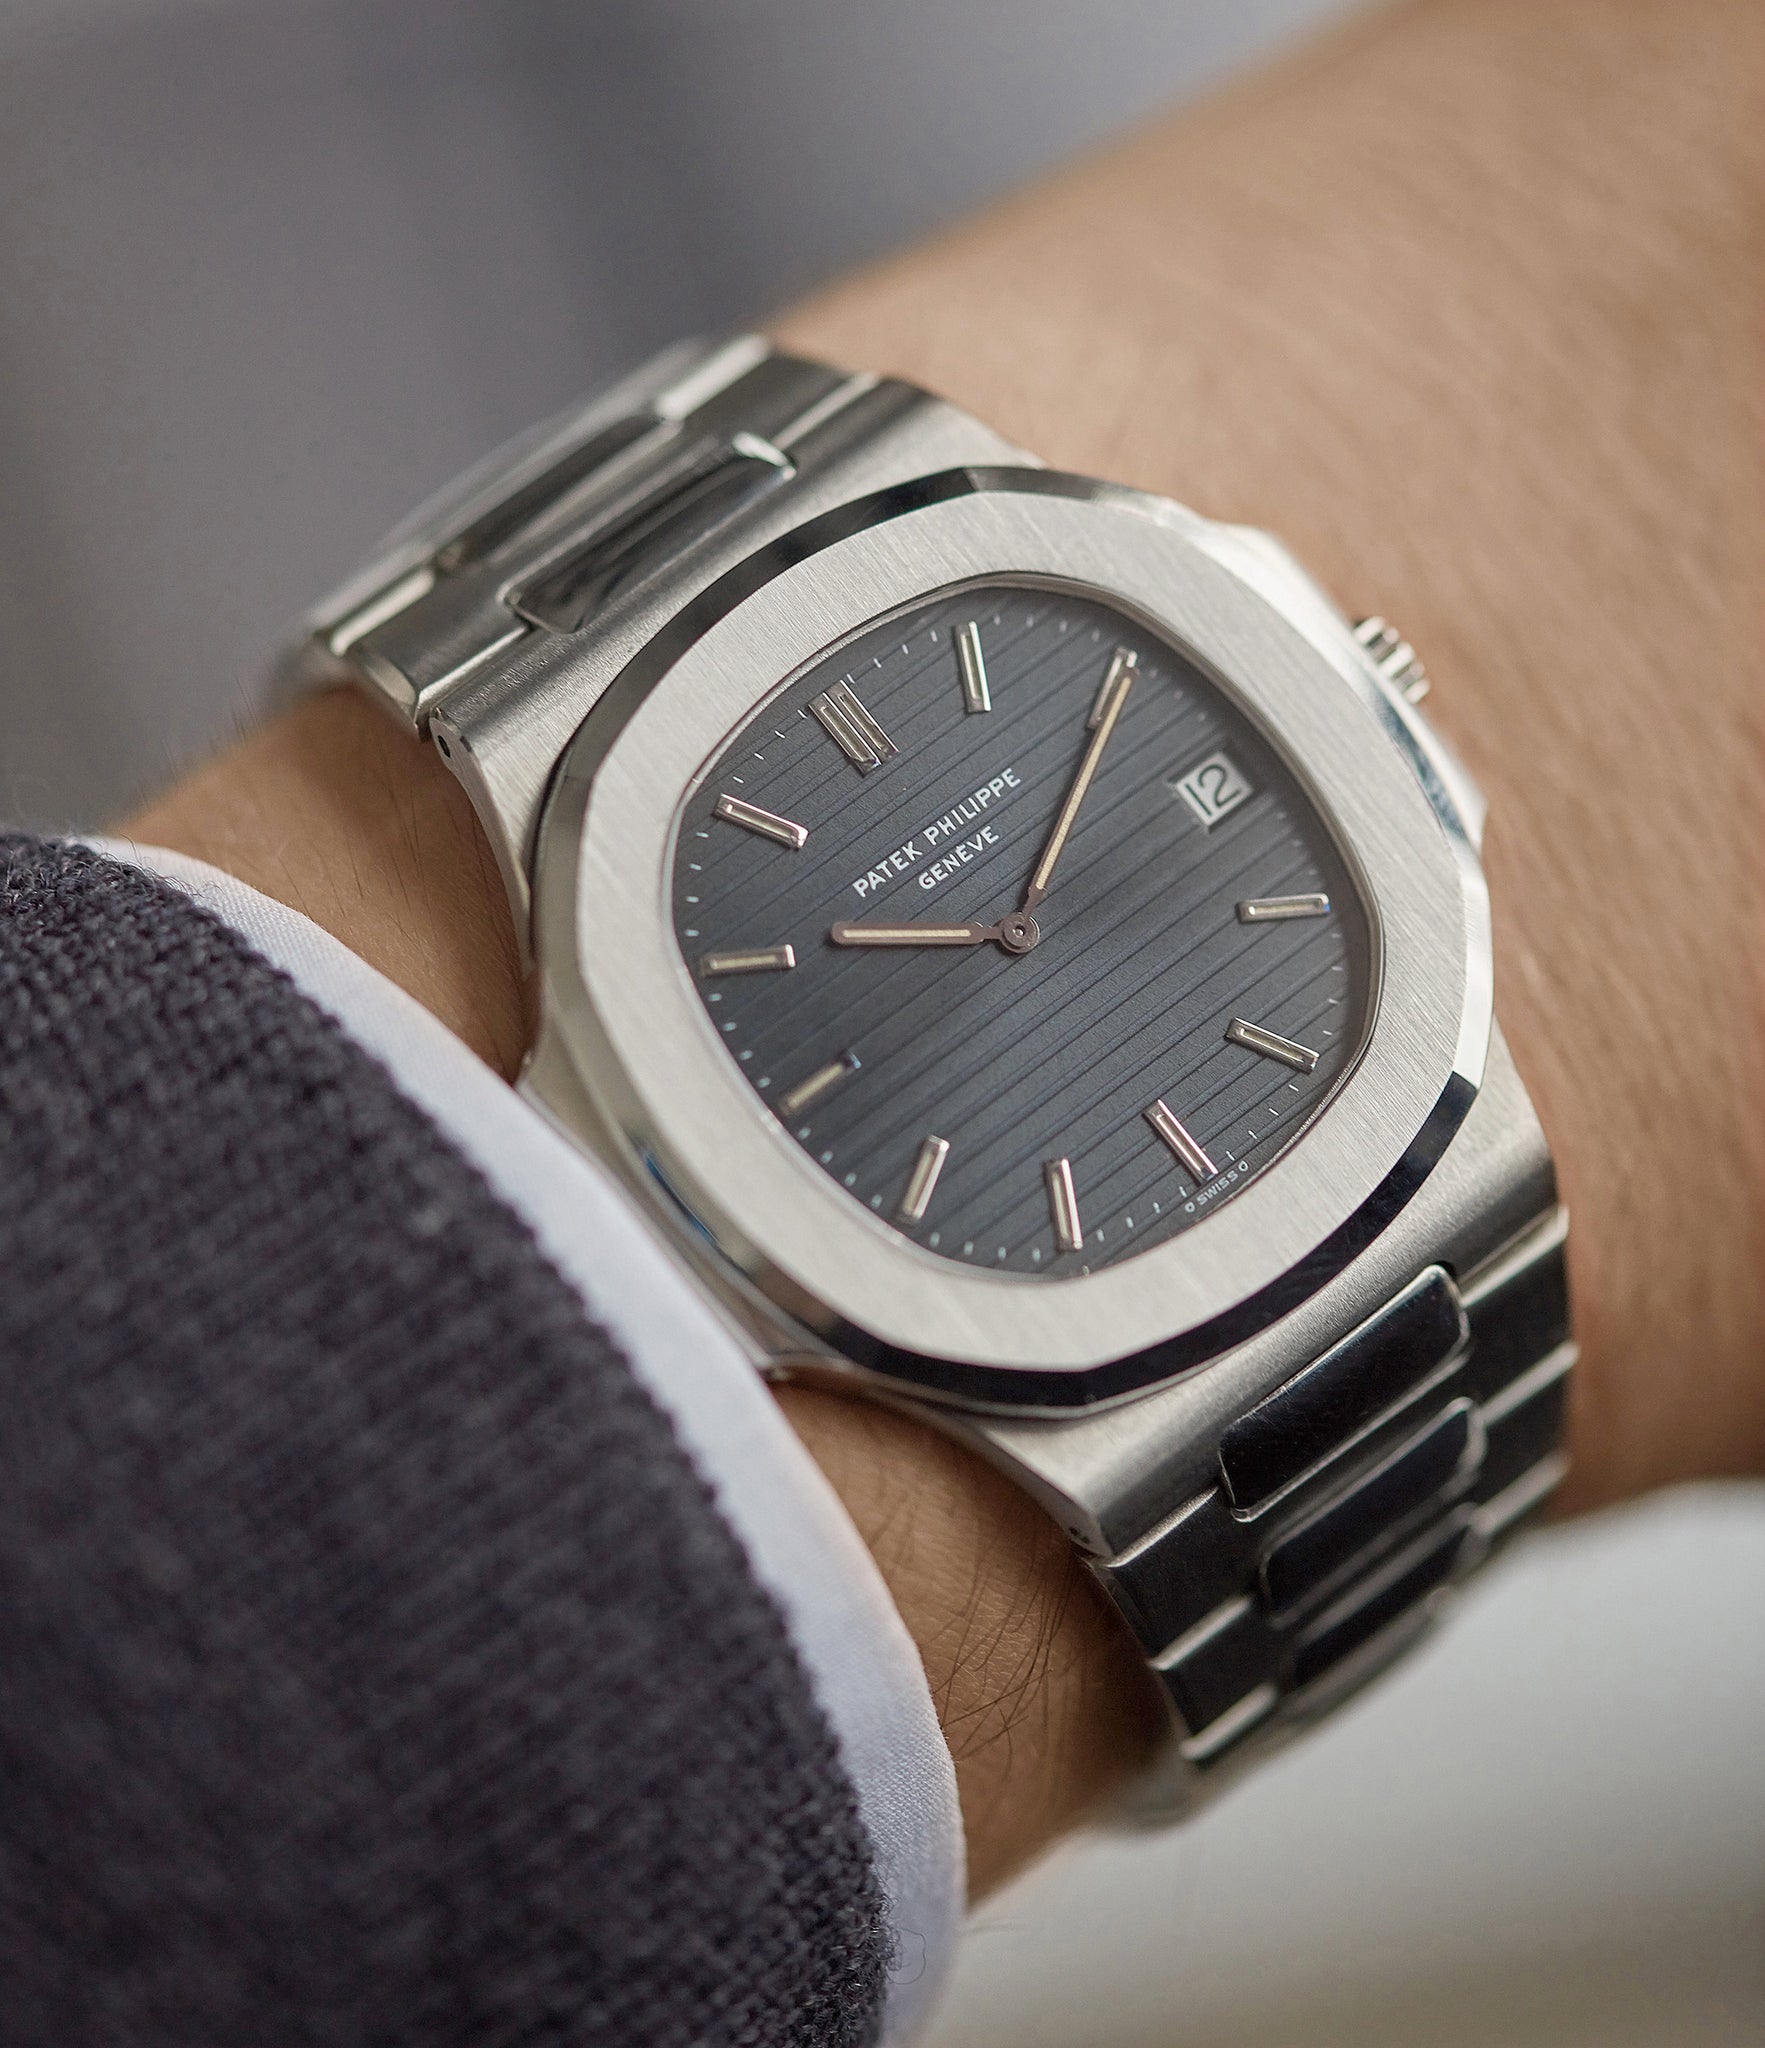 Patek_Philippe_nautilus_3700_1977_vintage_steel_watch_at_A_Collected_Man_London8_2048x2048